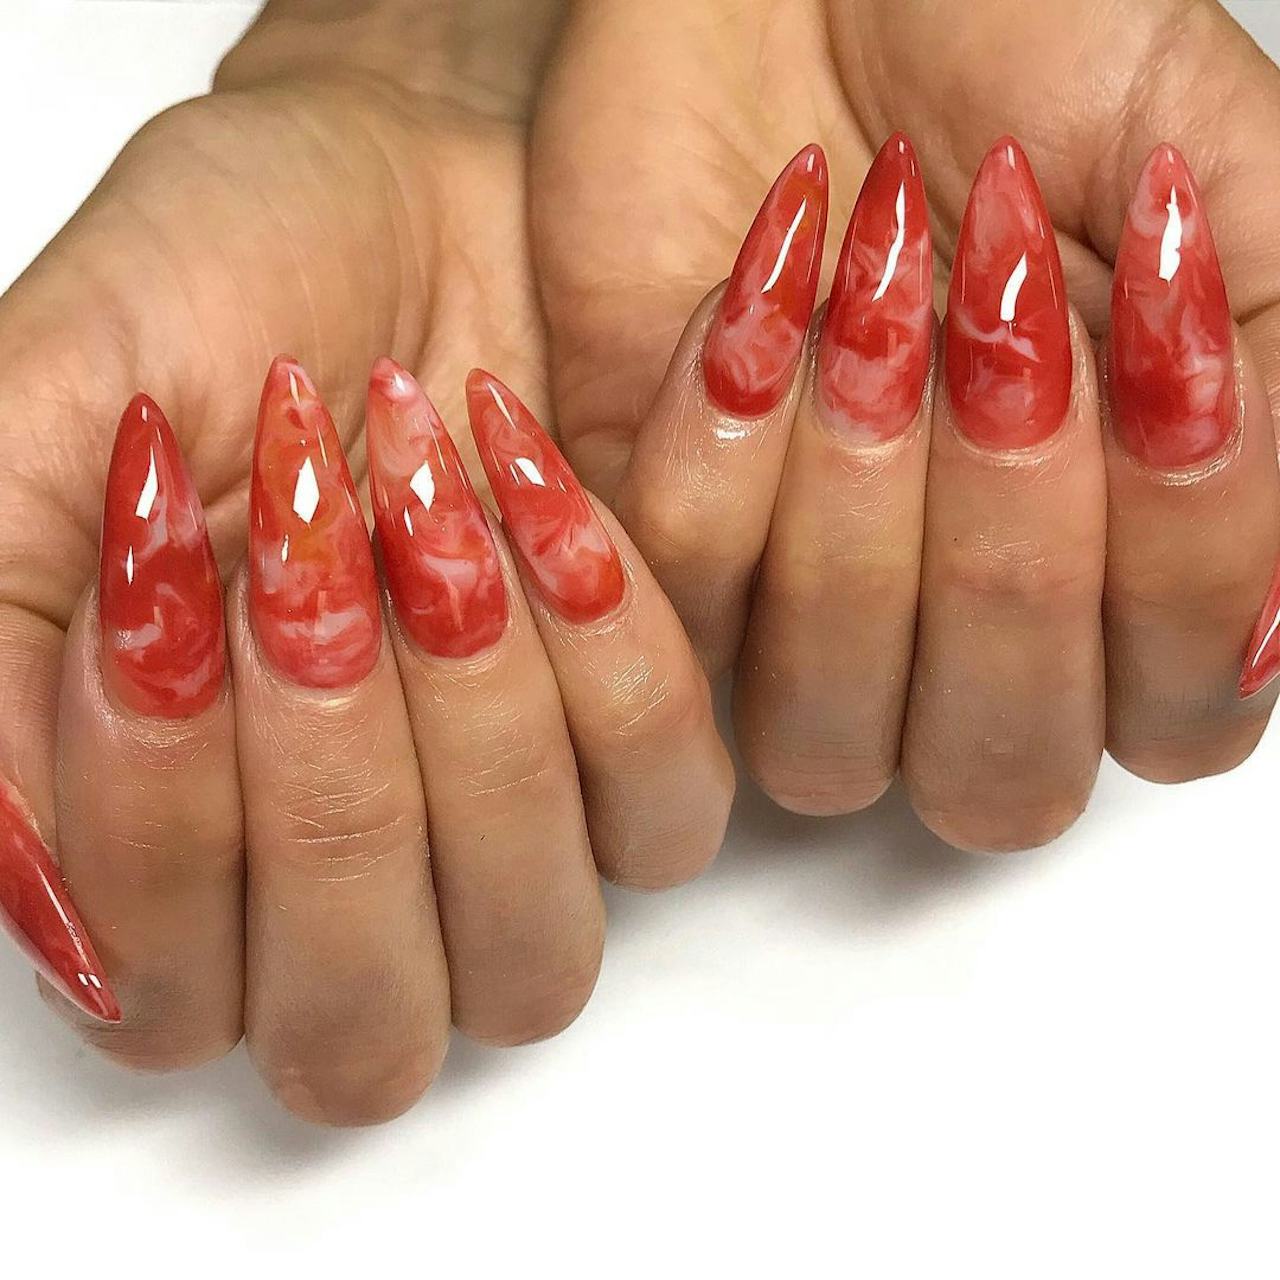 8 Red Nail Designs To Crank Up The Heat For Manicures